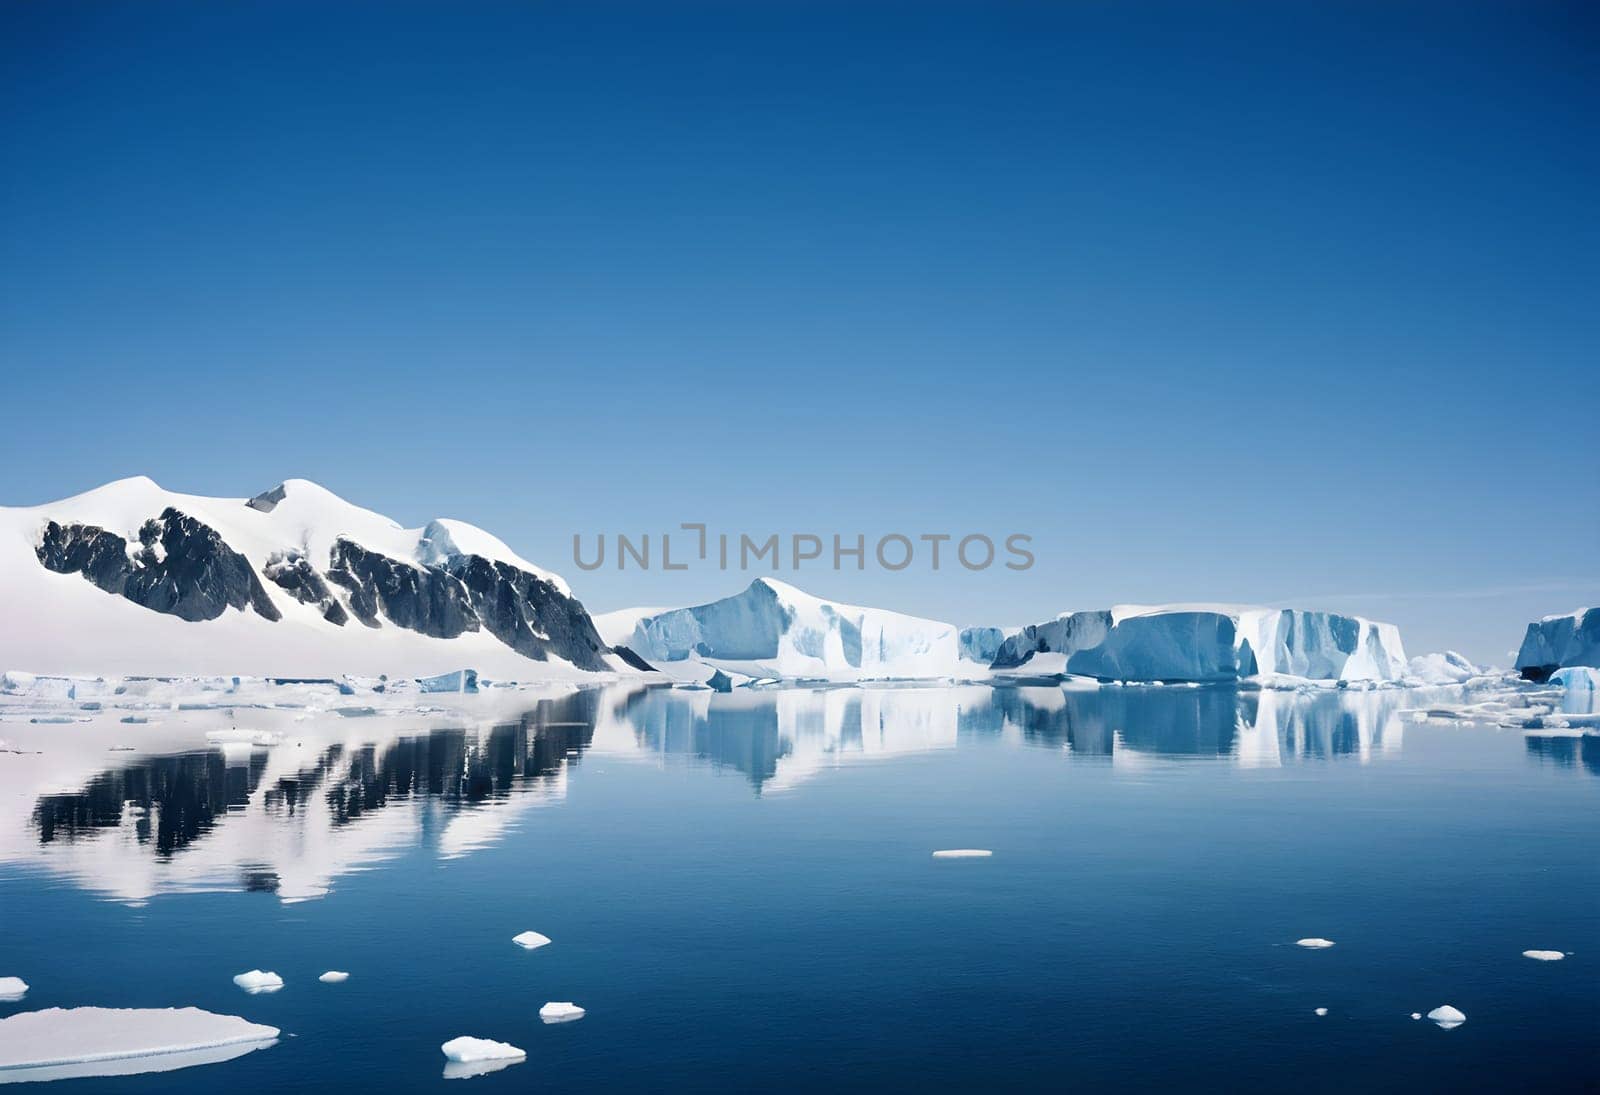 Icy Splendor: Captivating Views of Antarctica's Charcot Harbor and Mountainous Terrain by Petrichor